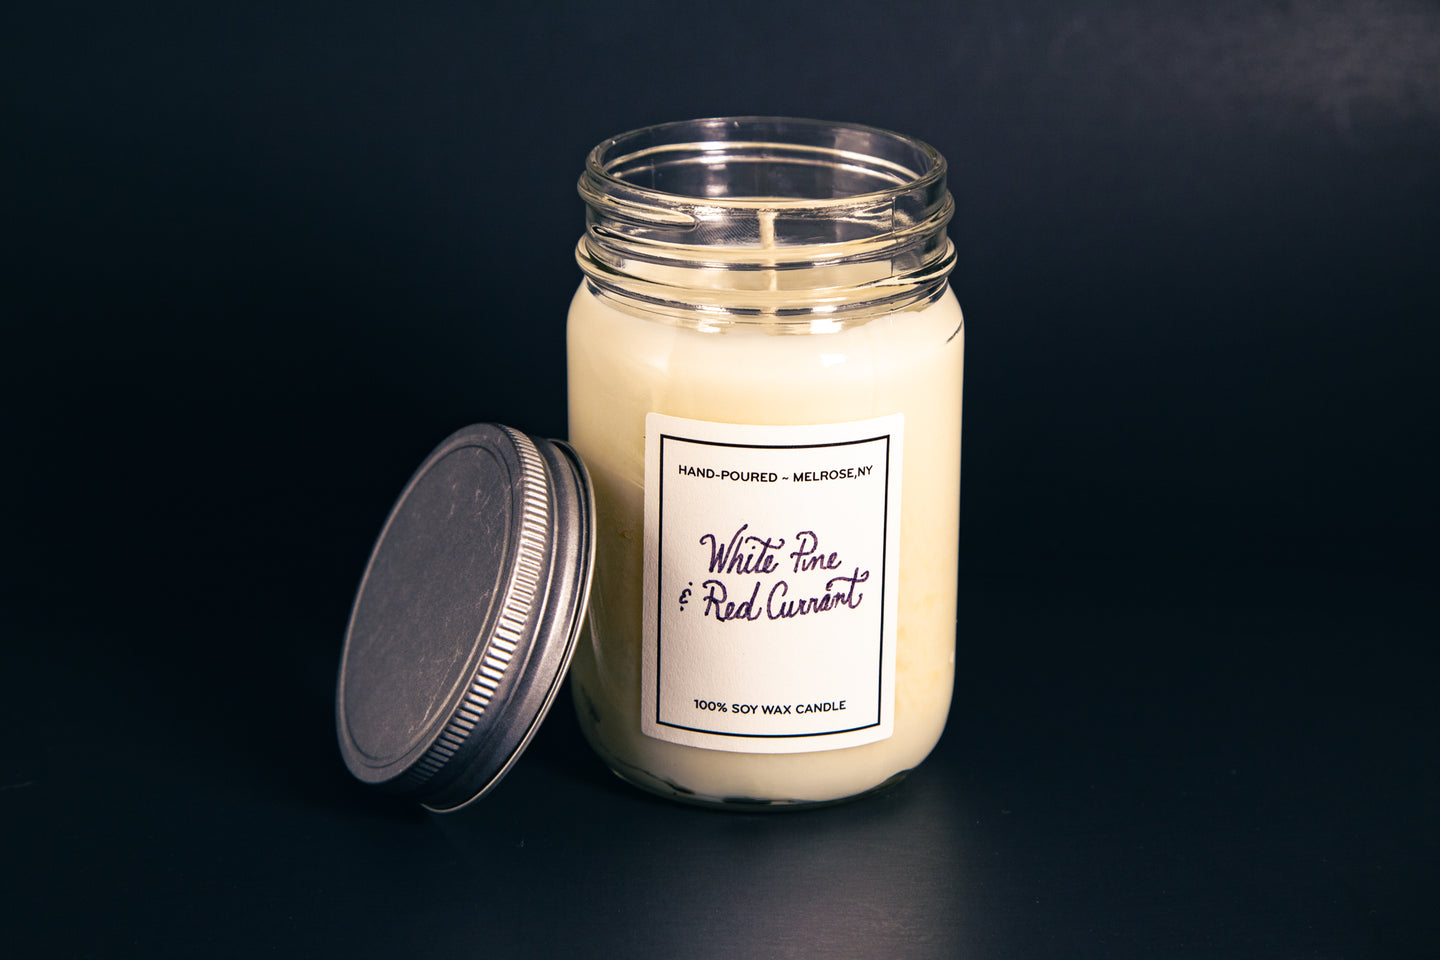 White Pine & Red Currant Soy Candle